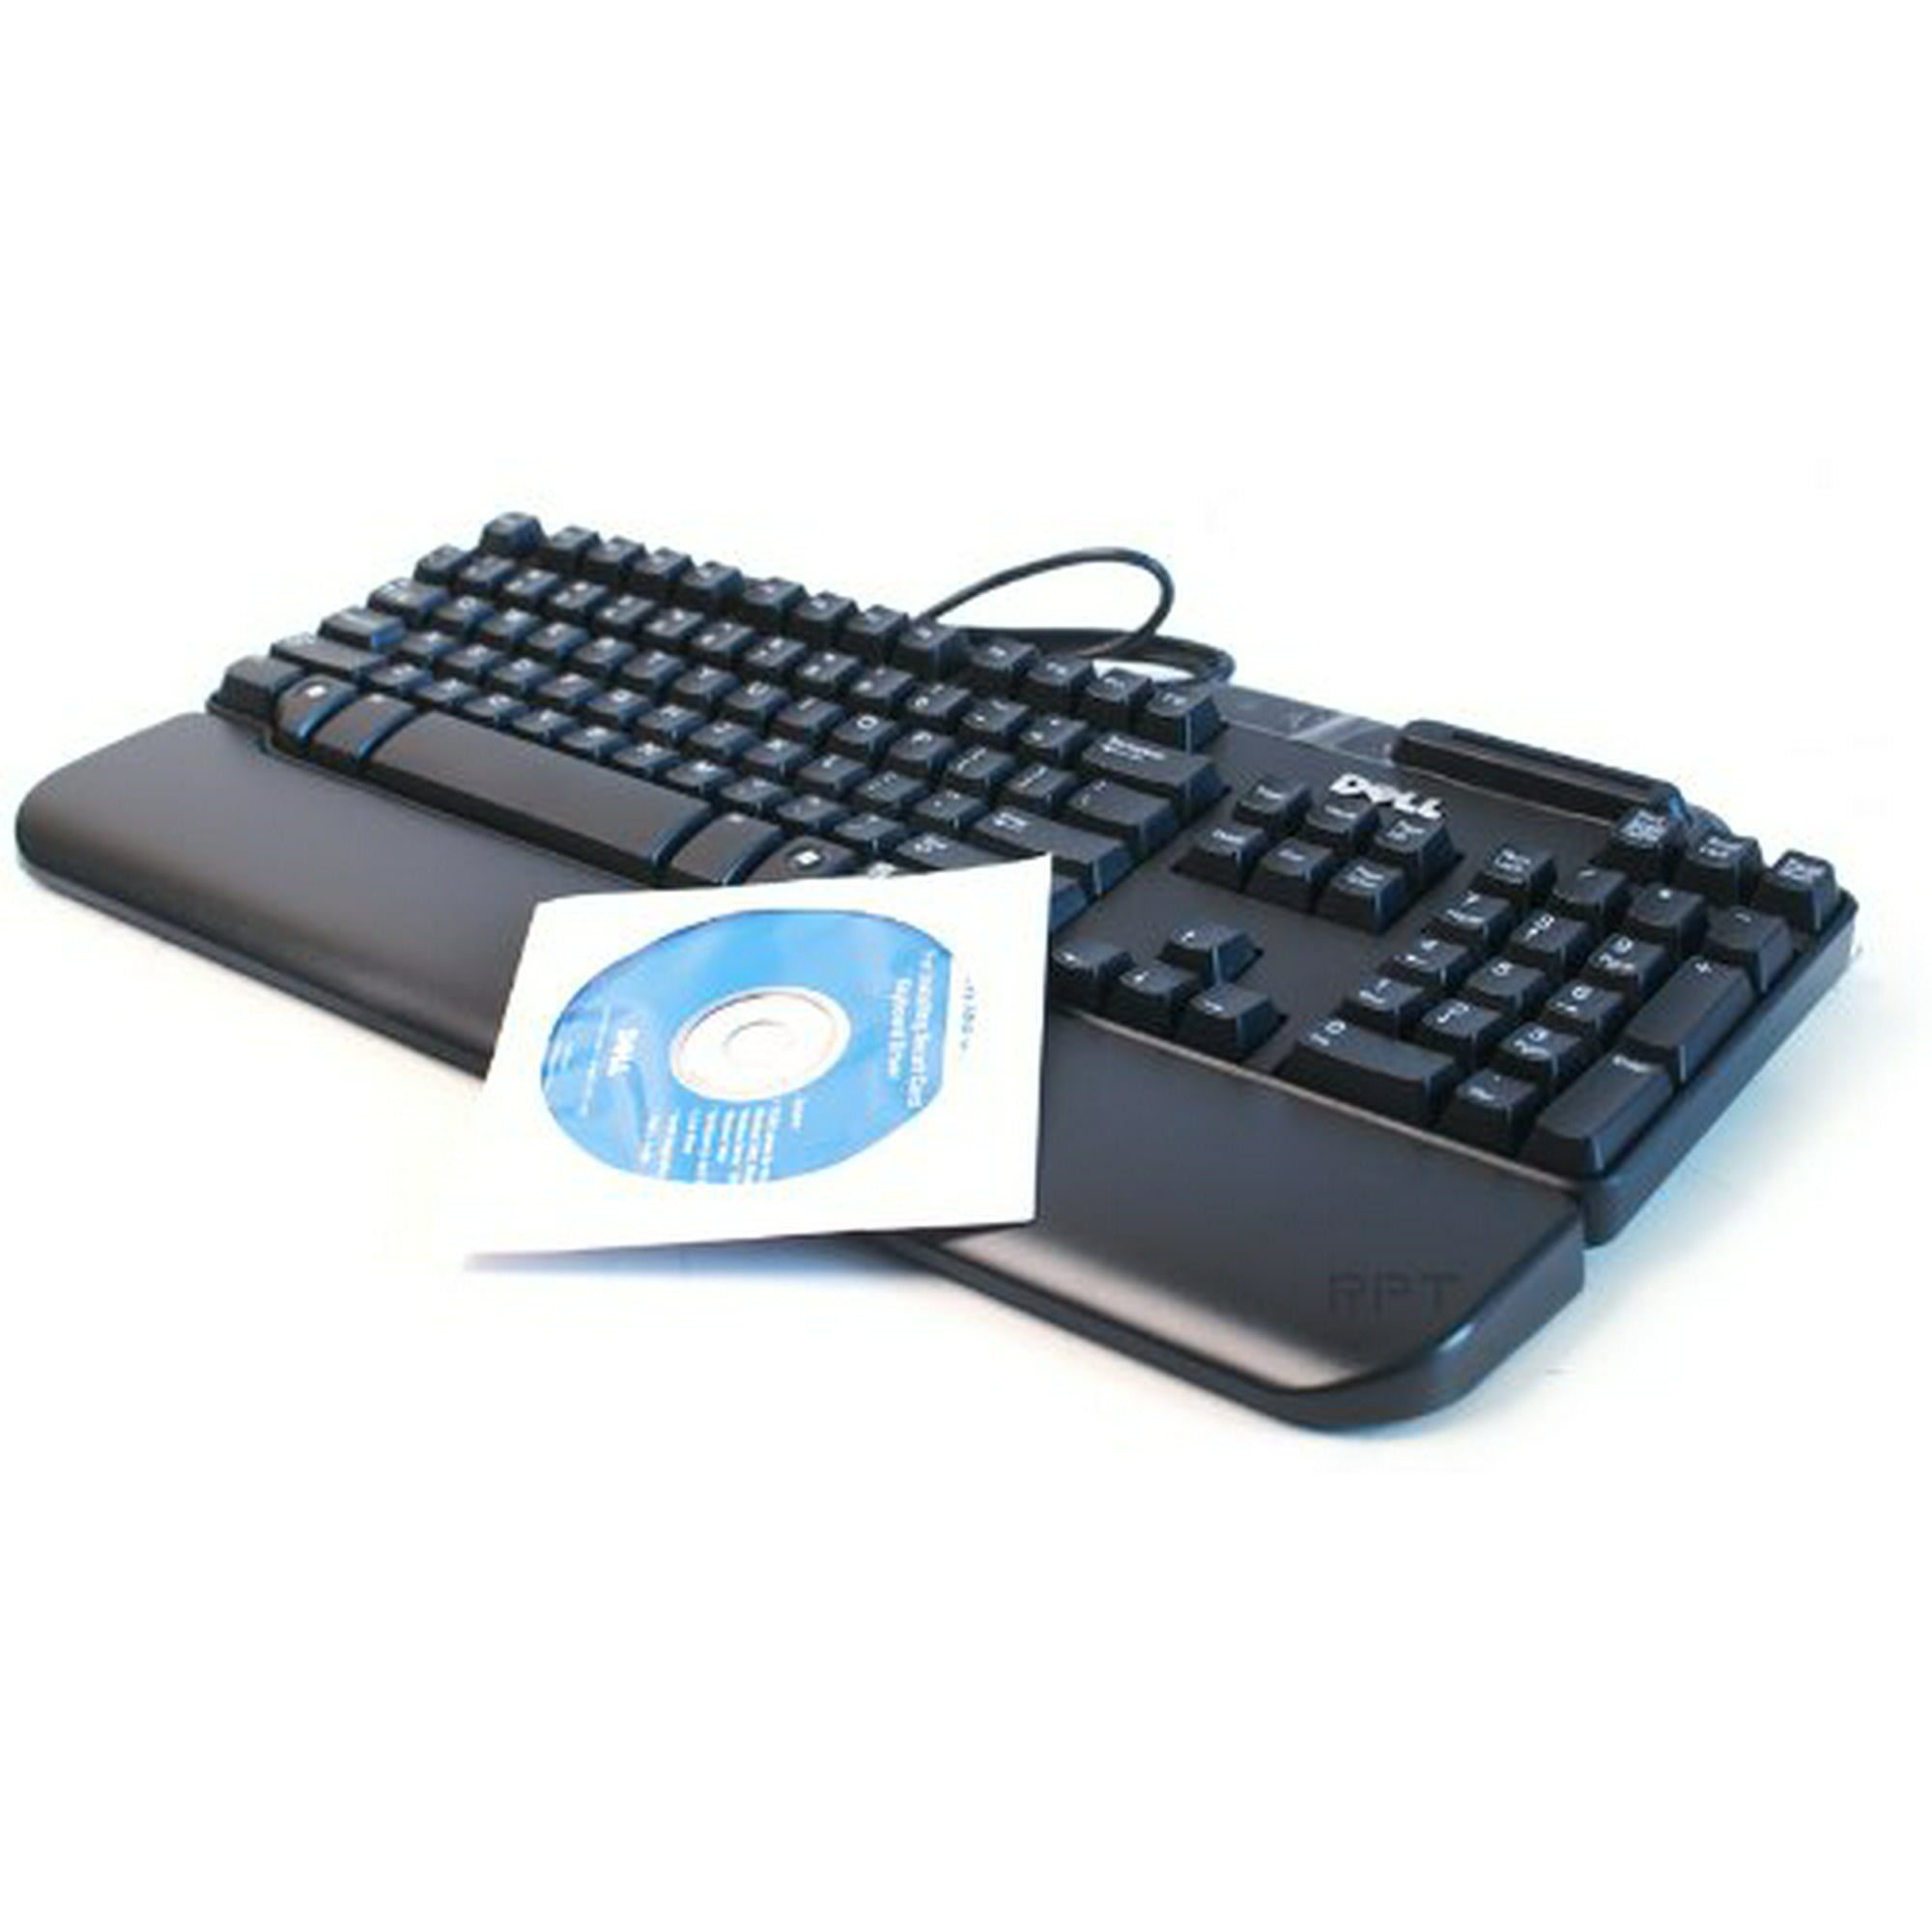 filosof Besætte sammenhængende Genuine Dell SK-3205 104 Key Wired USB Keyboard KW240, NY559, KW218 With  Smart Card Reader (Drivers Included), And Palm Rest | Walmart Canada